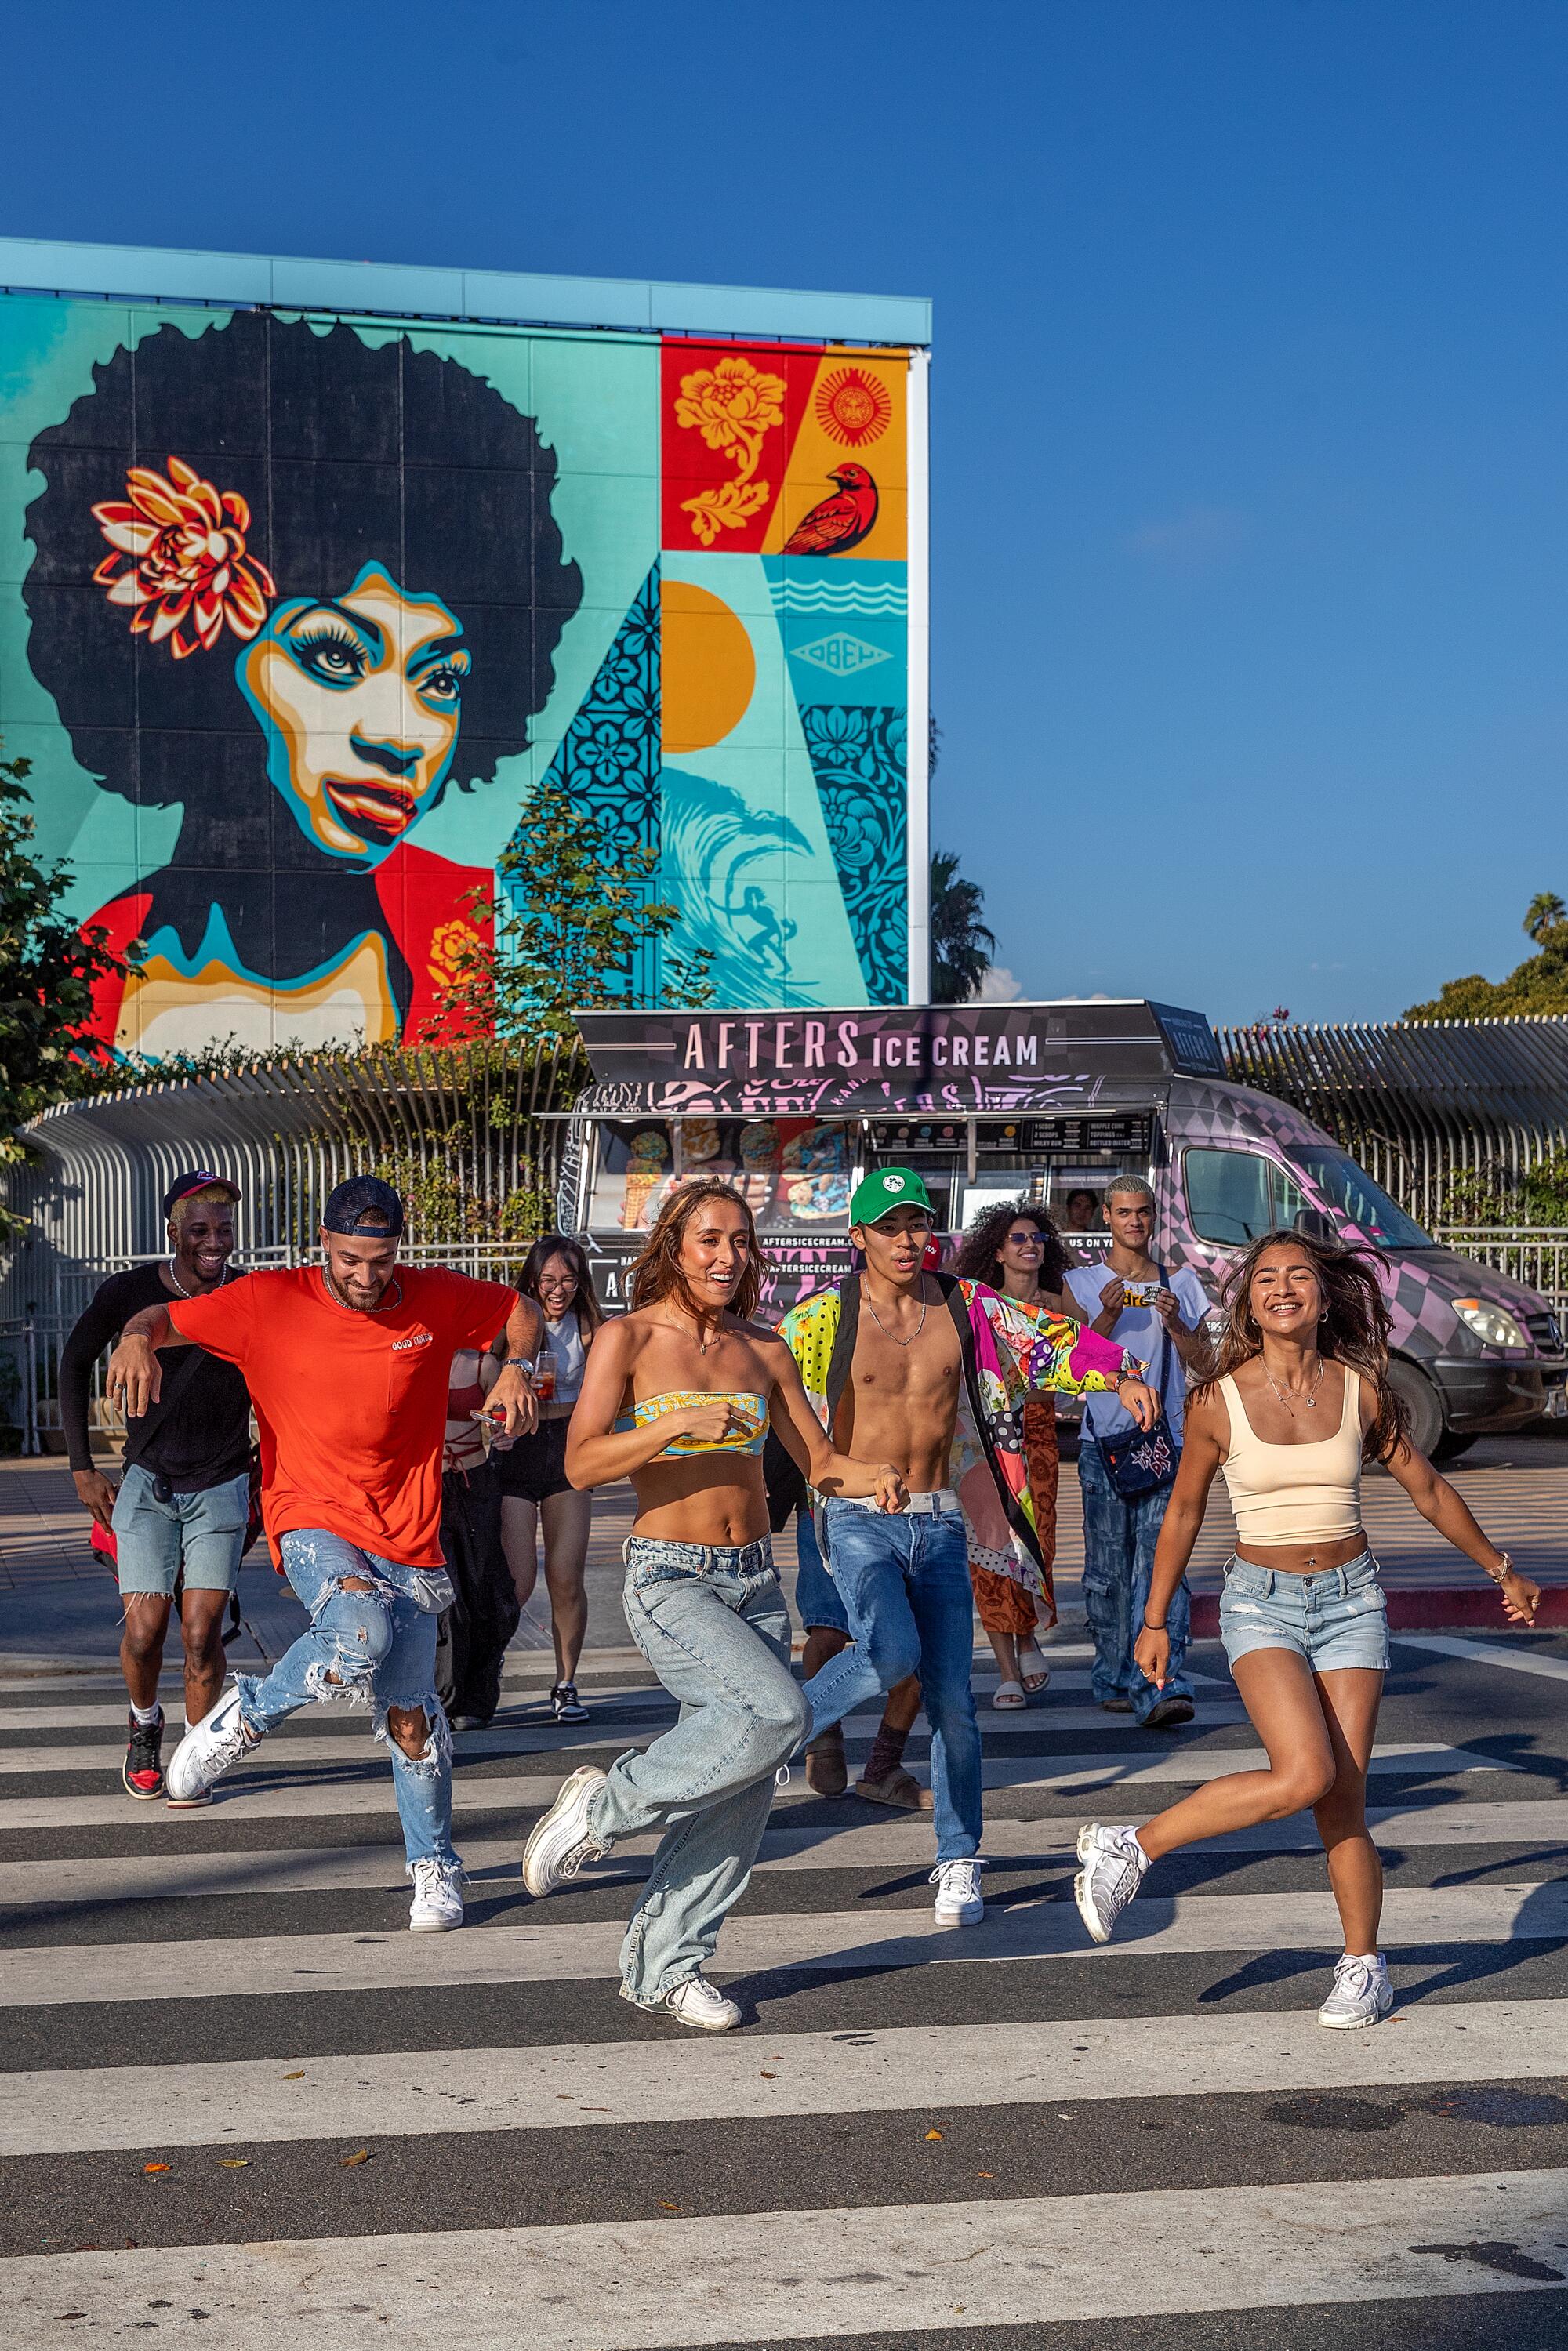 People dancing in a crosswalk in front of a colorful mural.